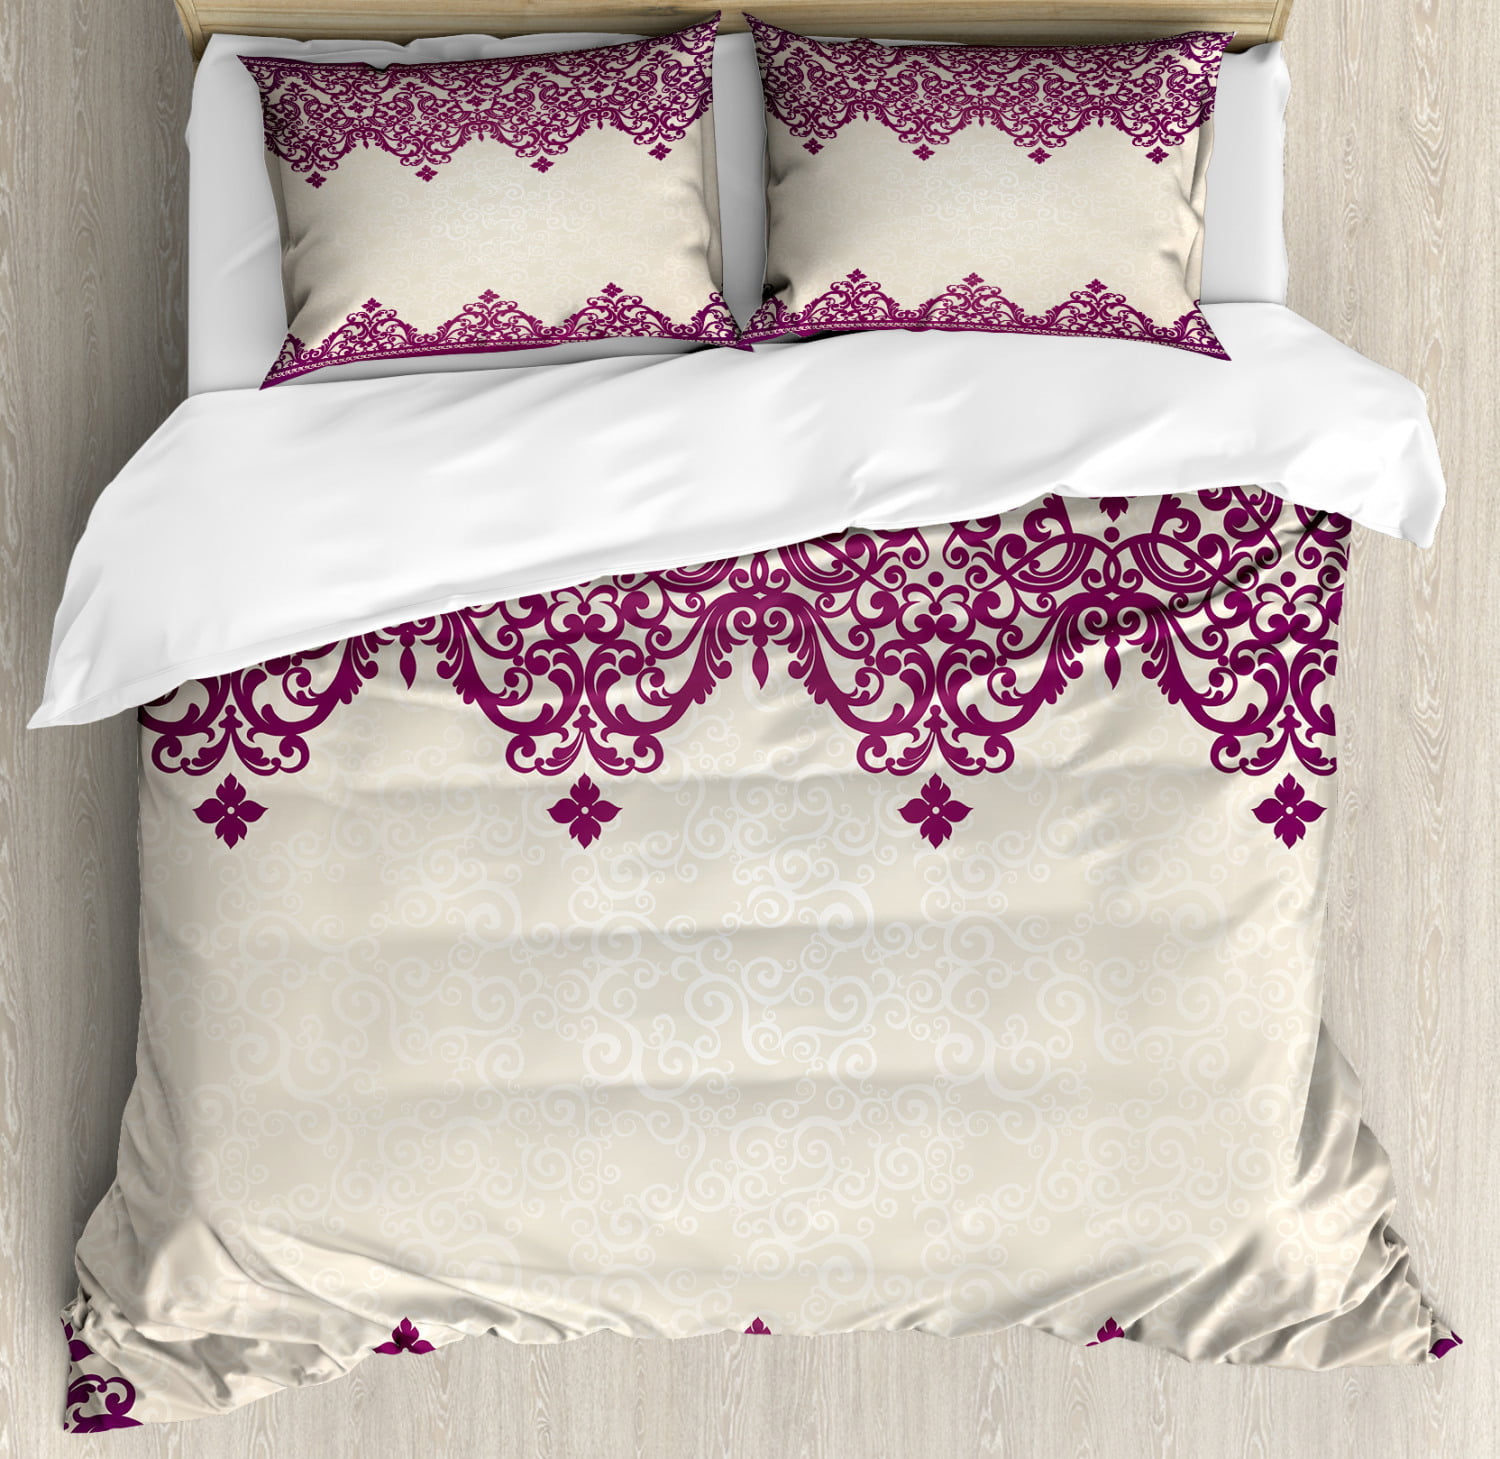 Turkish Pattern King Size Duvet Cover Set Old Fashioned Borders